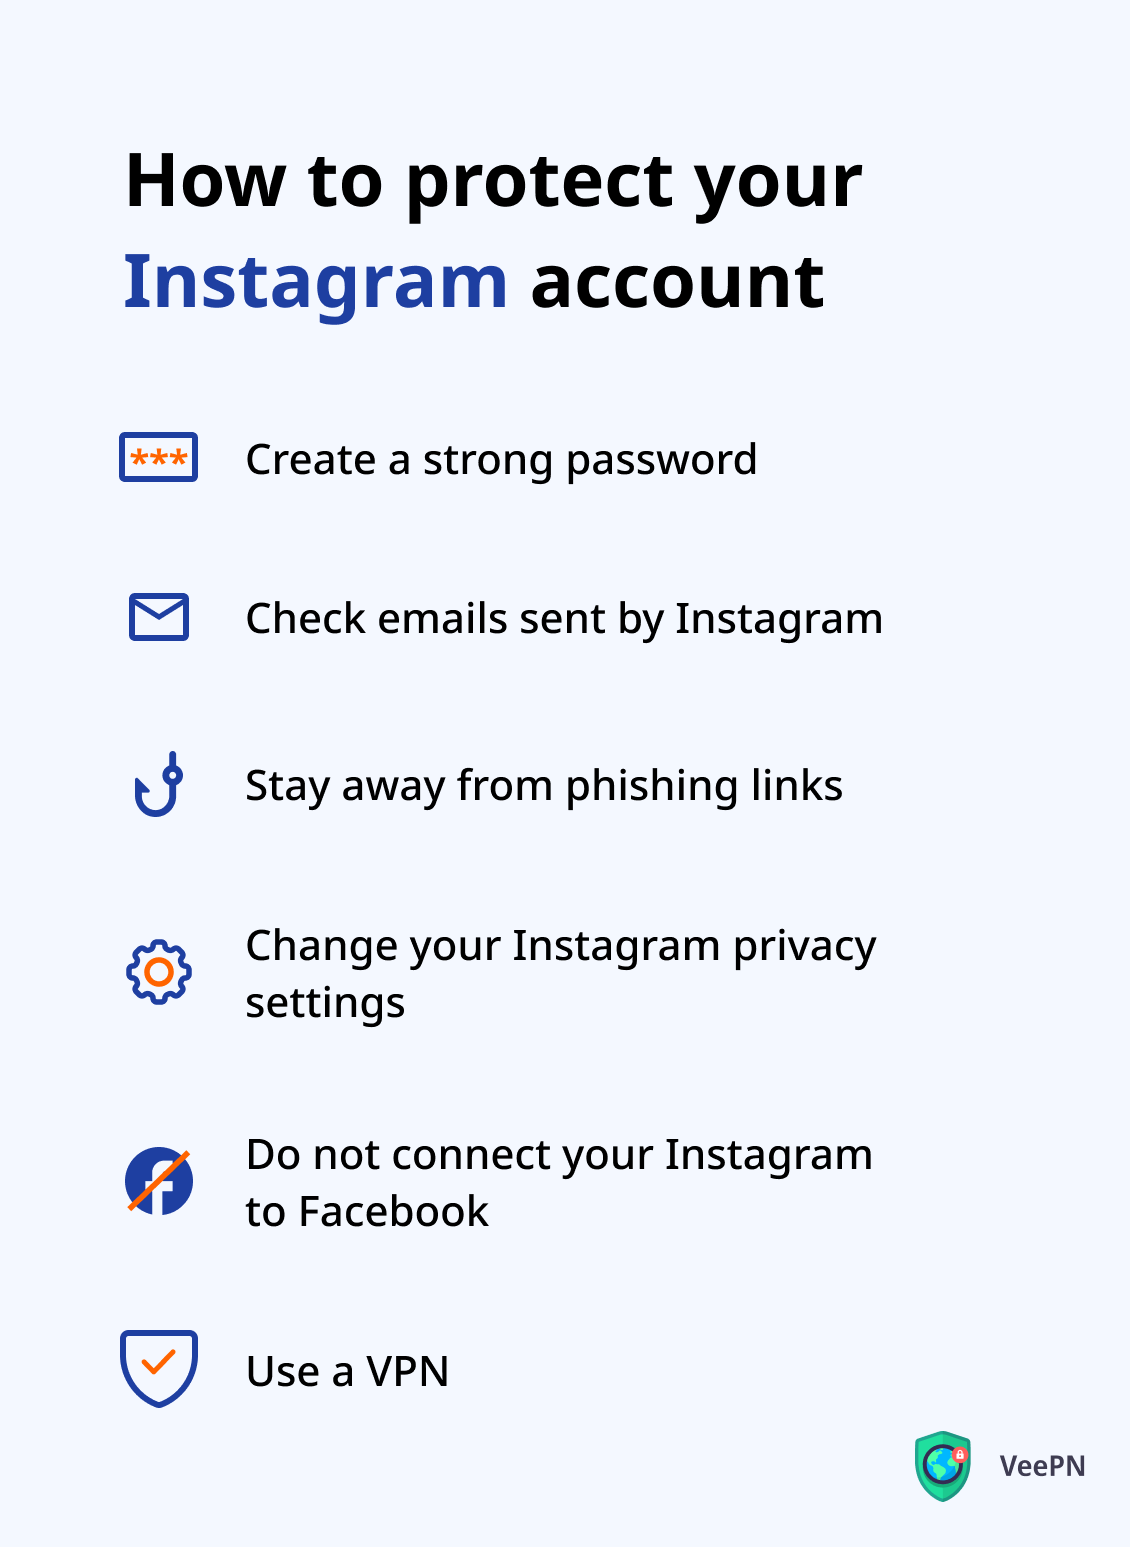 How to protect your Instagram account.